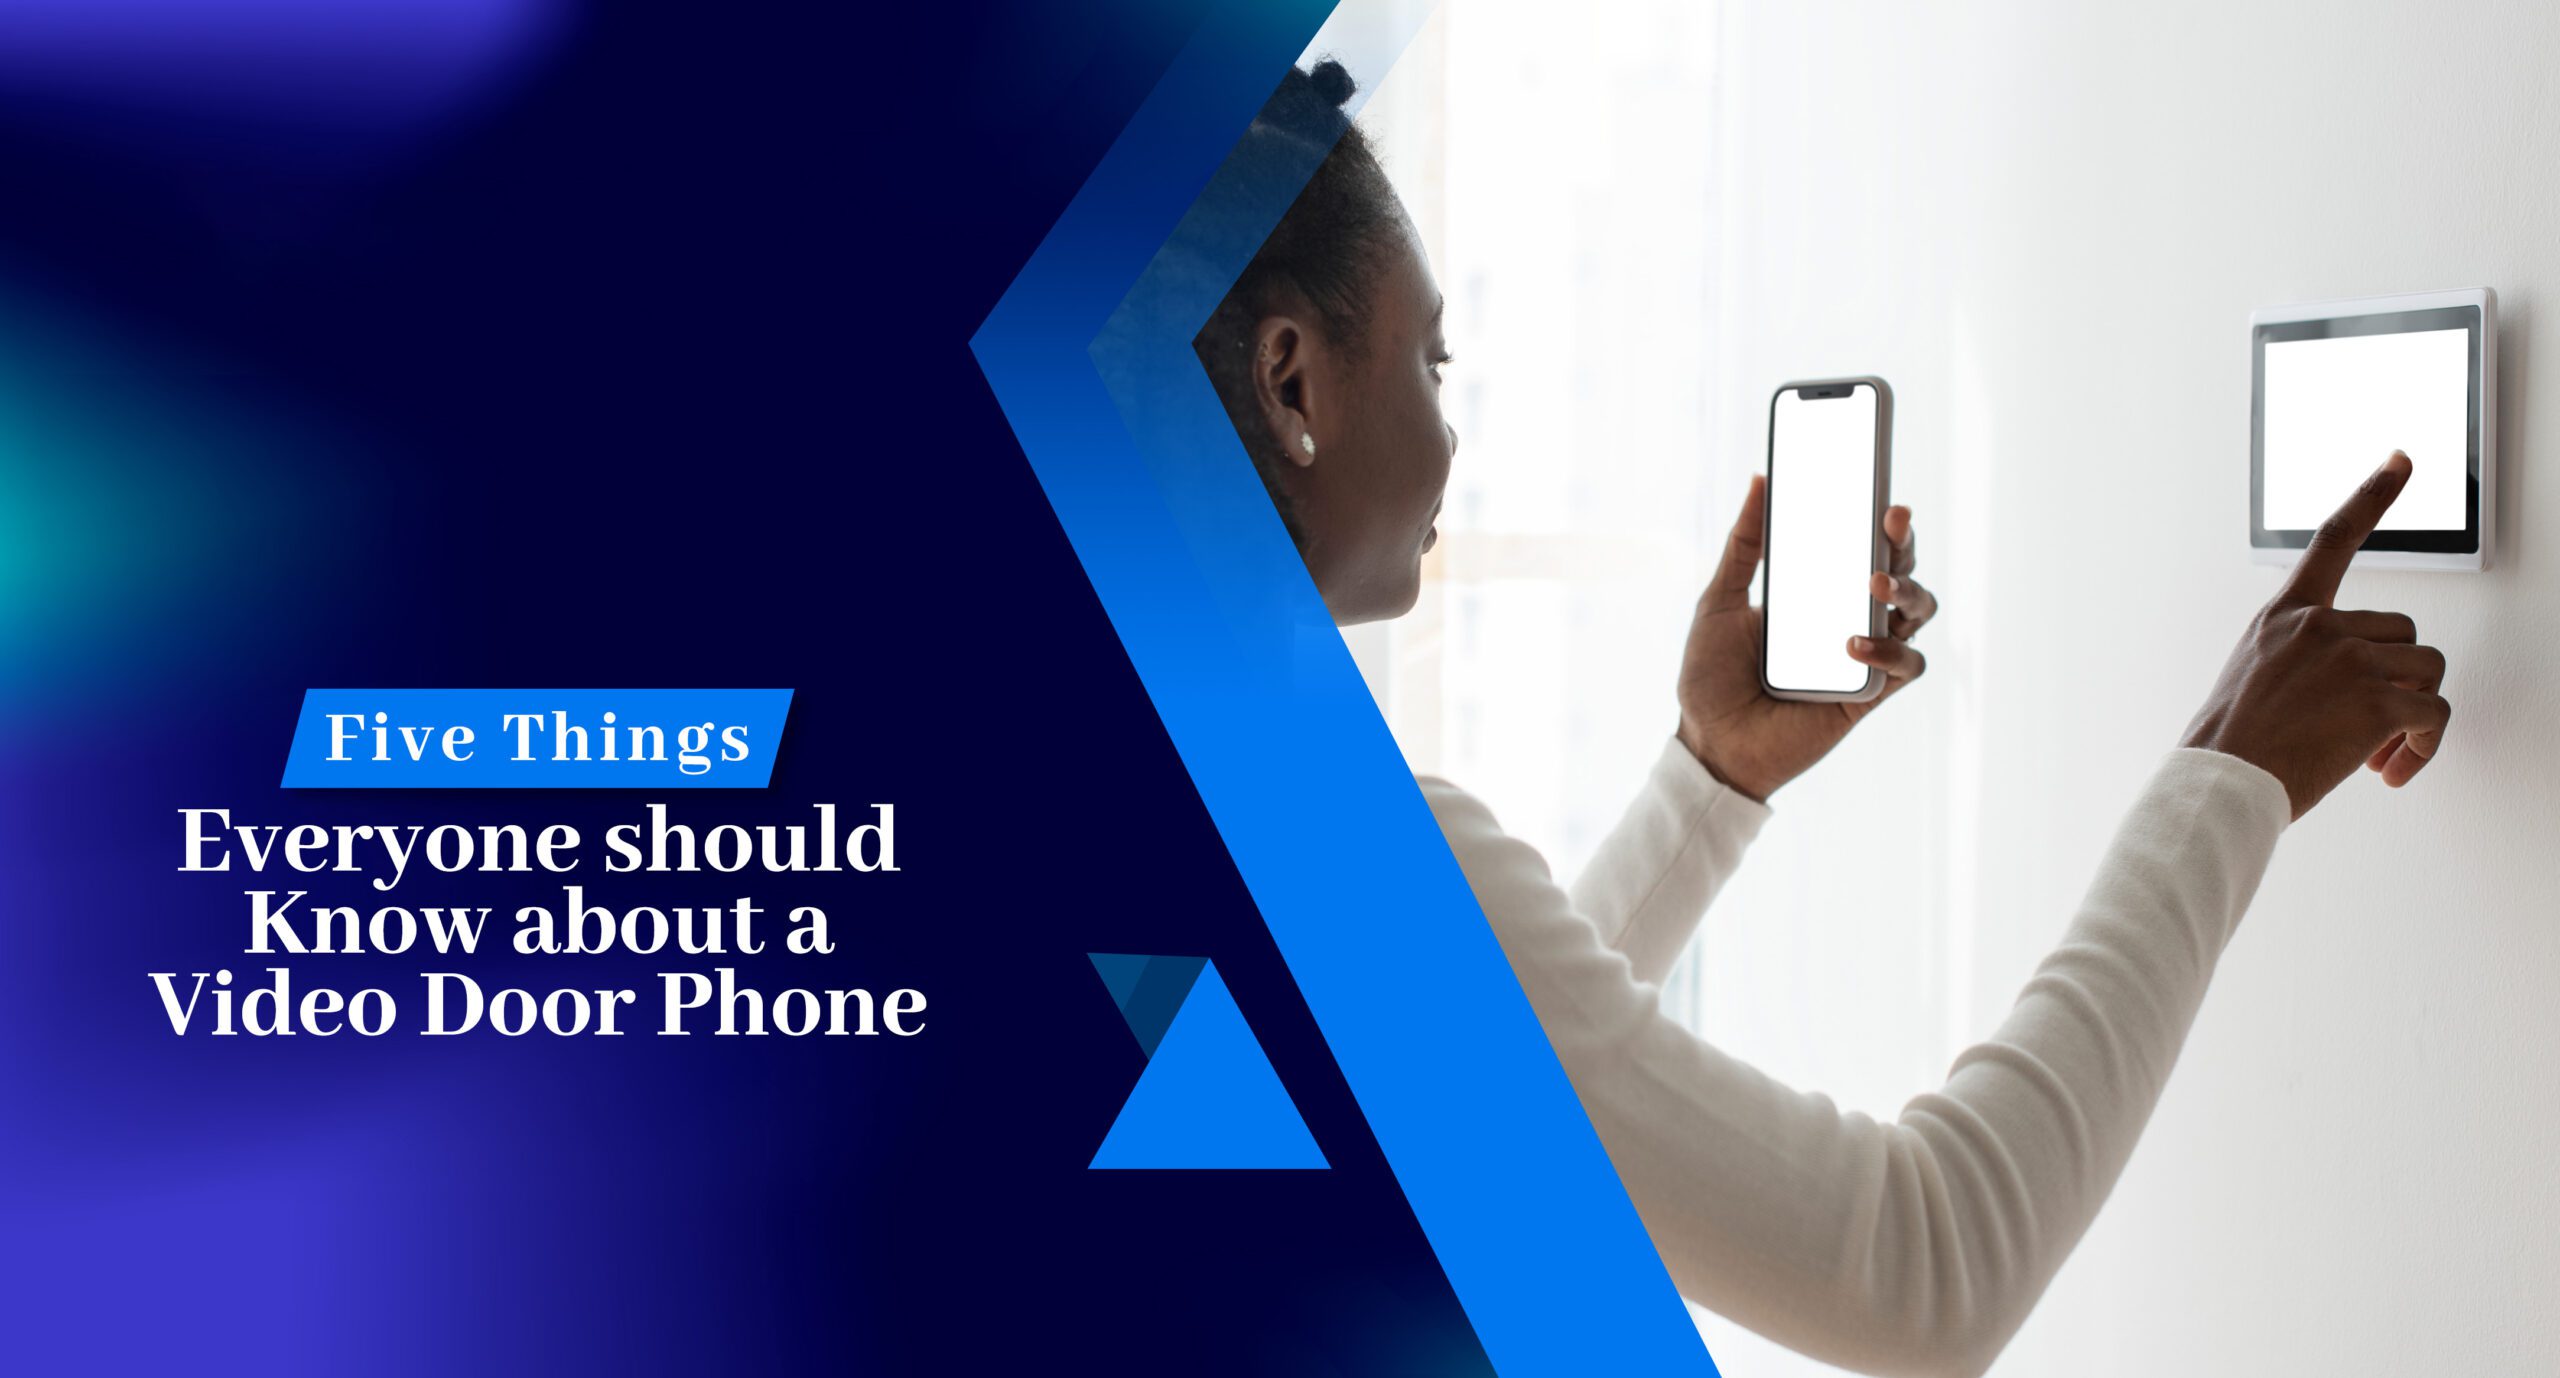 Featured image for “Five Things Everyone should Know about a Video Door Phone”